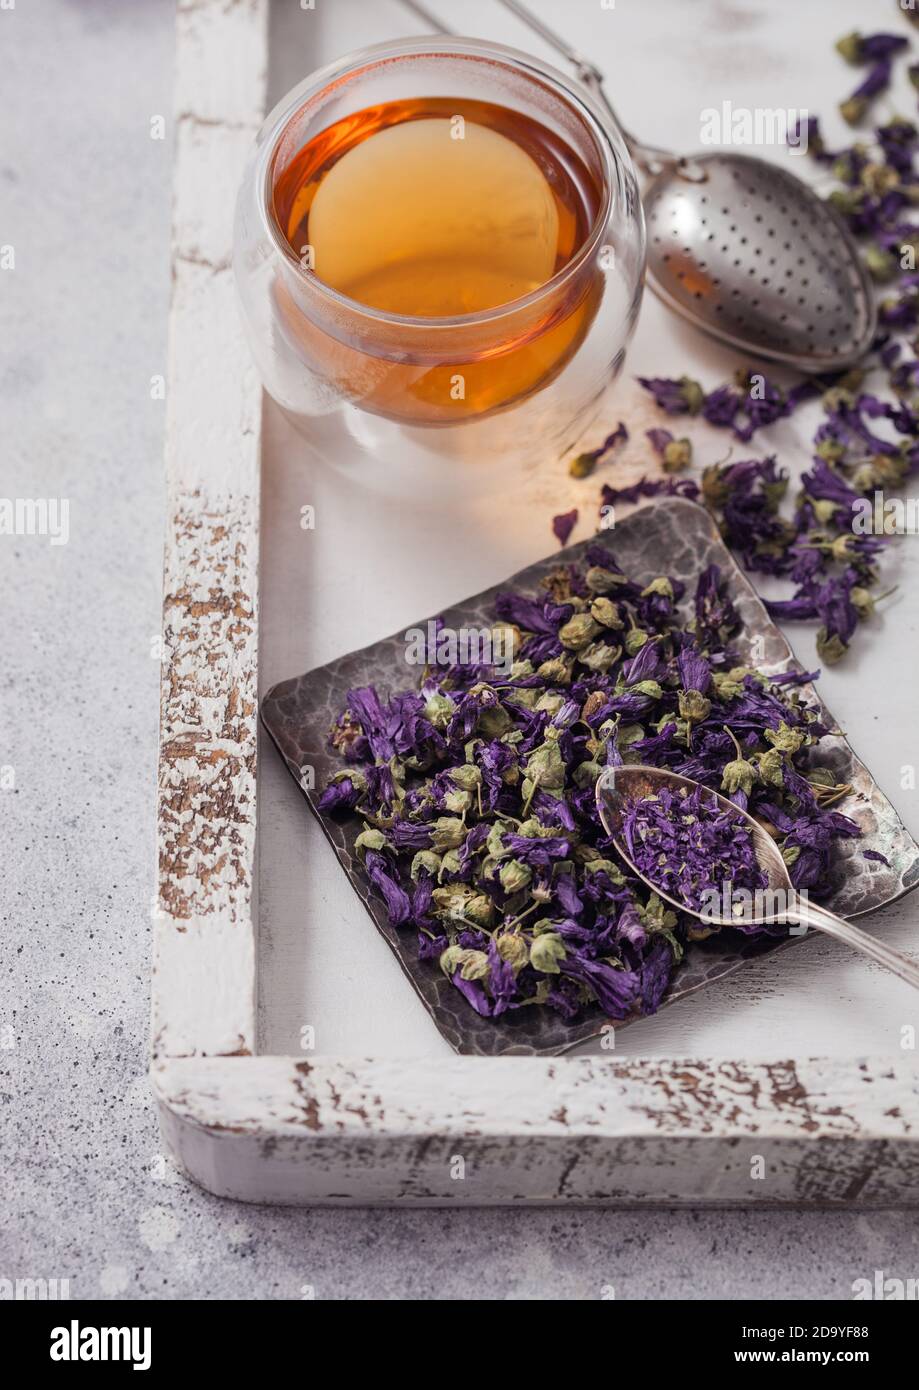 Blue Mallow Flowers Herbal Tea With Vintage Strainer Infuser In Wooden Box On White Table Background Macro Stock Photo Alamy